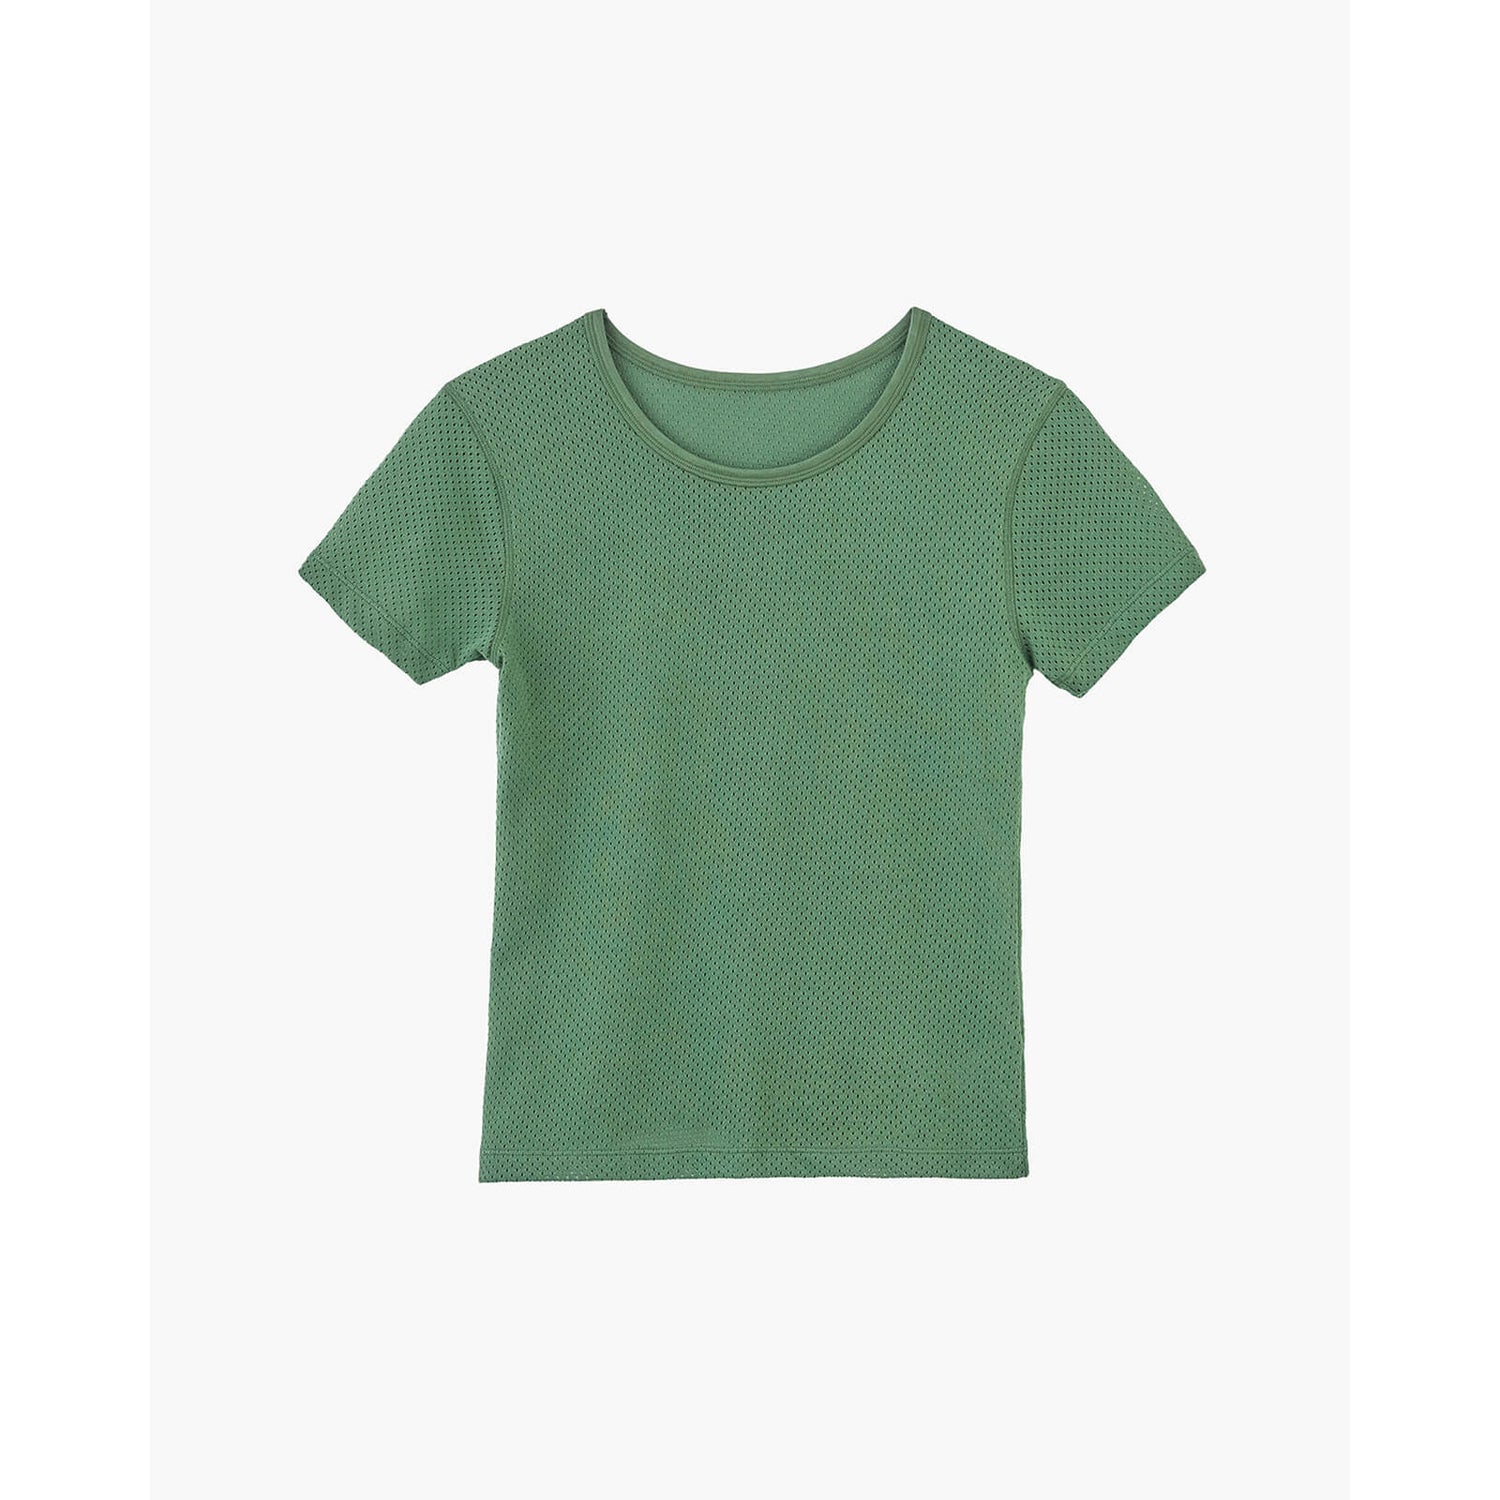 Les Girls Les Boys Women's Cotton Perforated Baby Tee - Green - XS